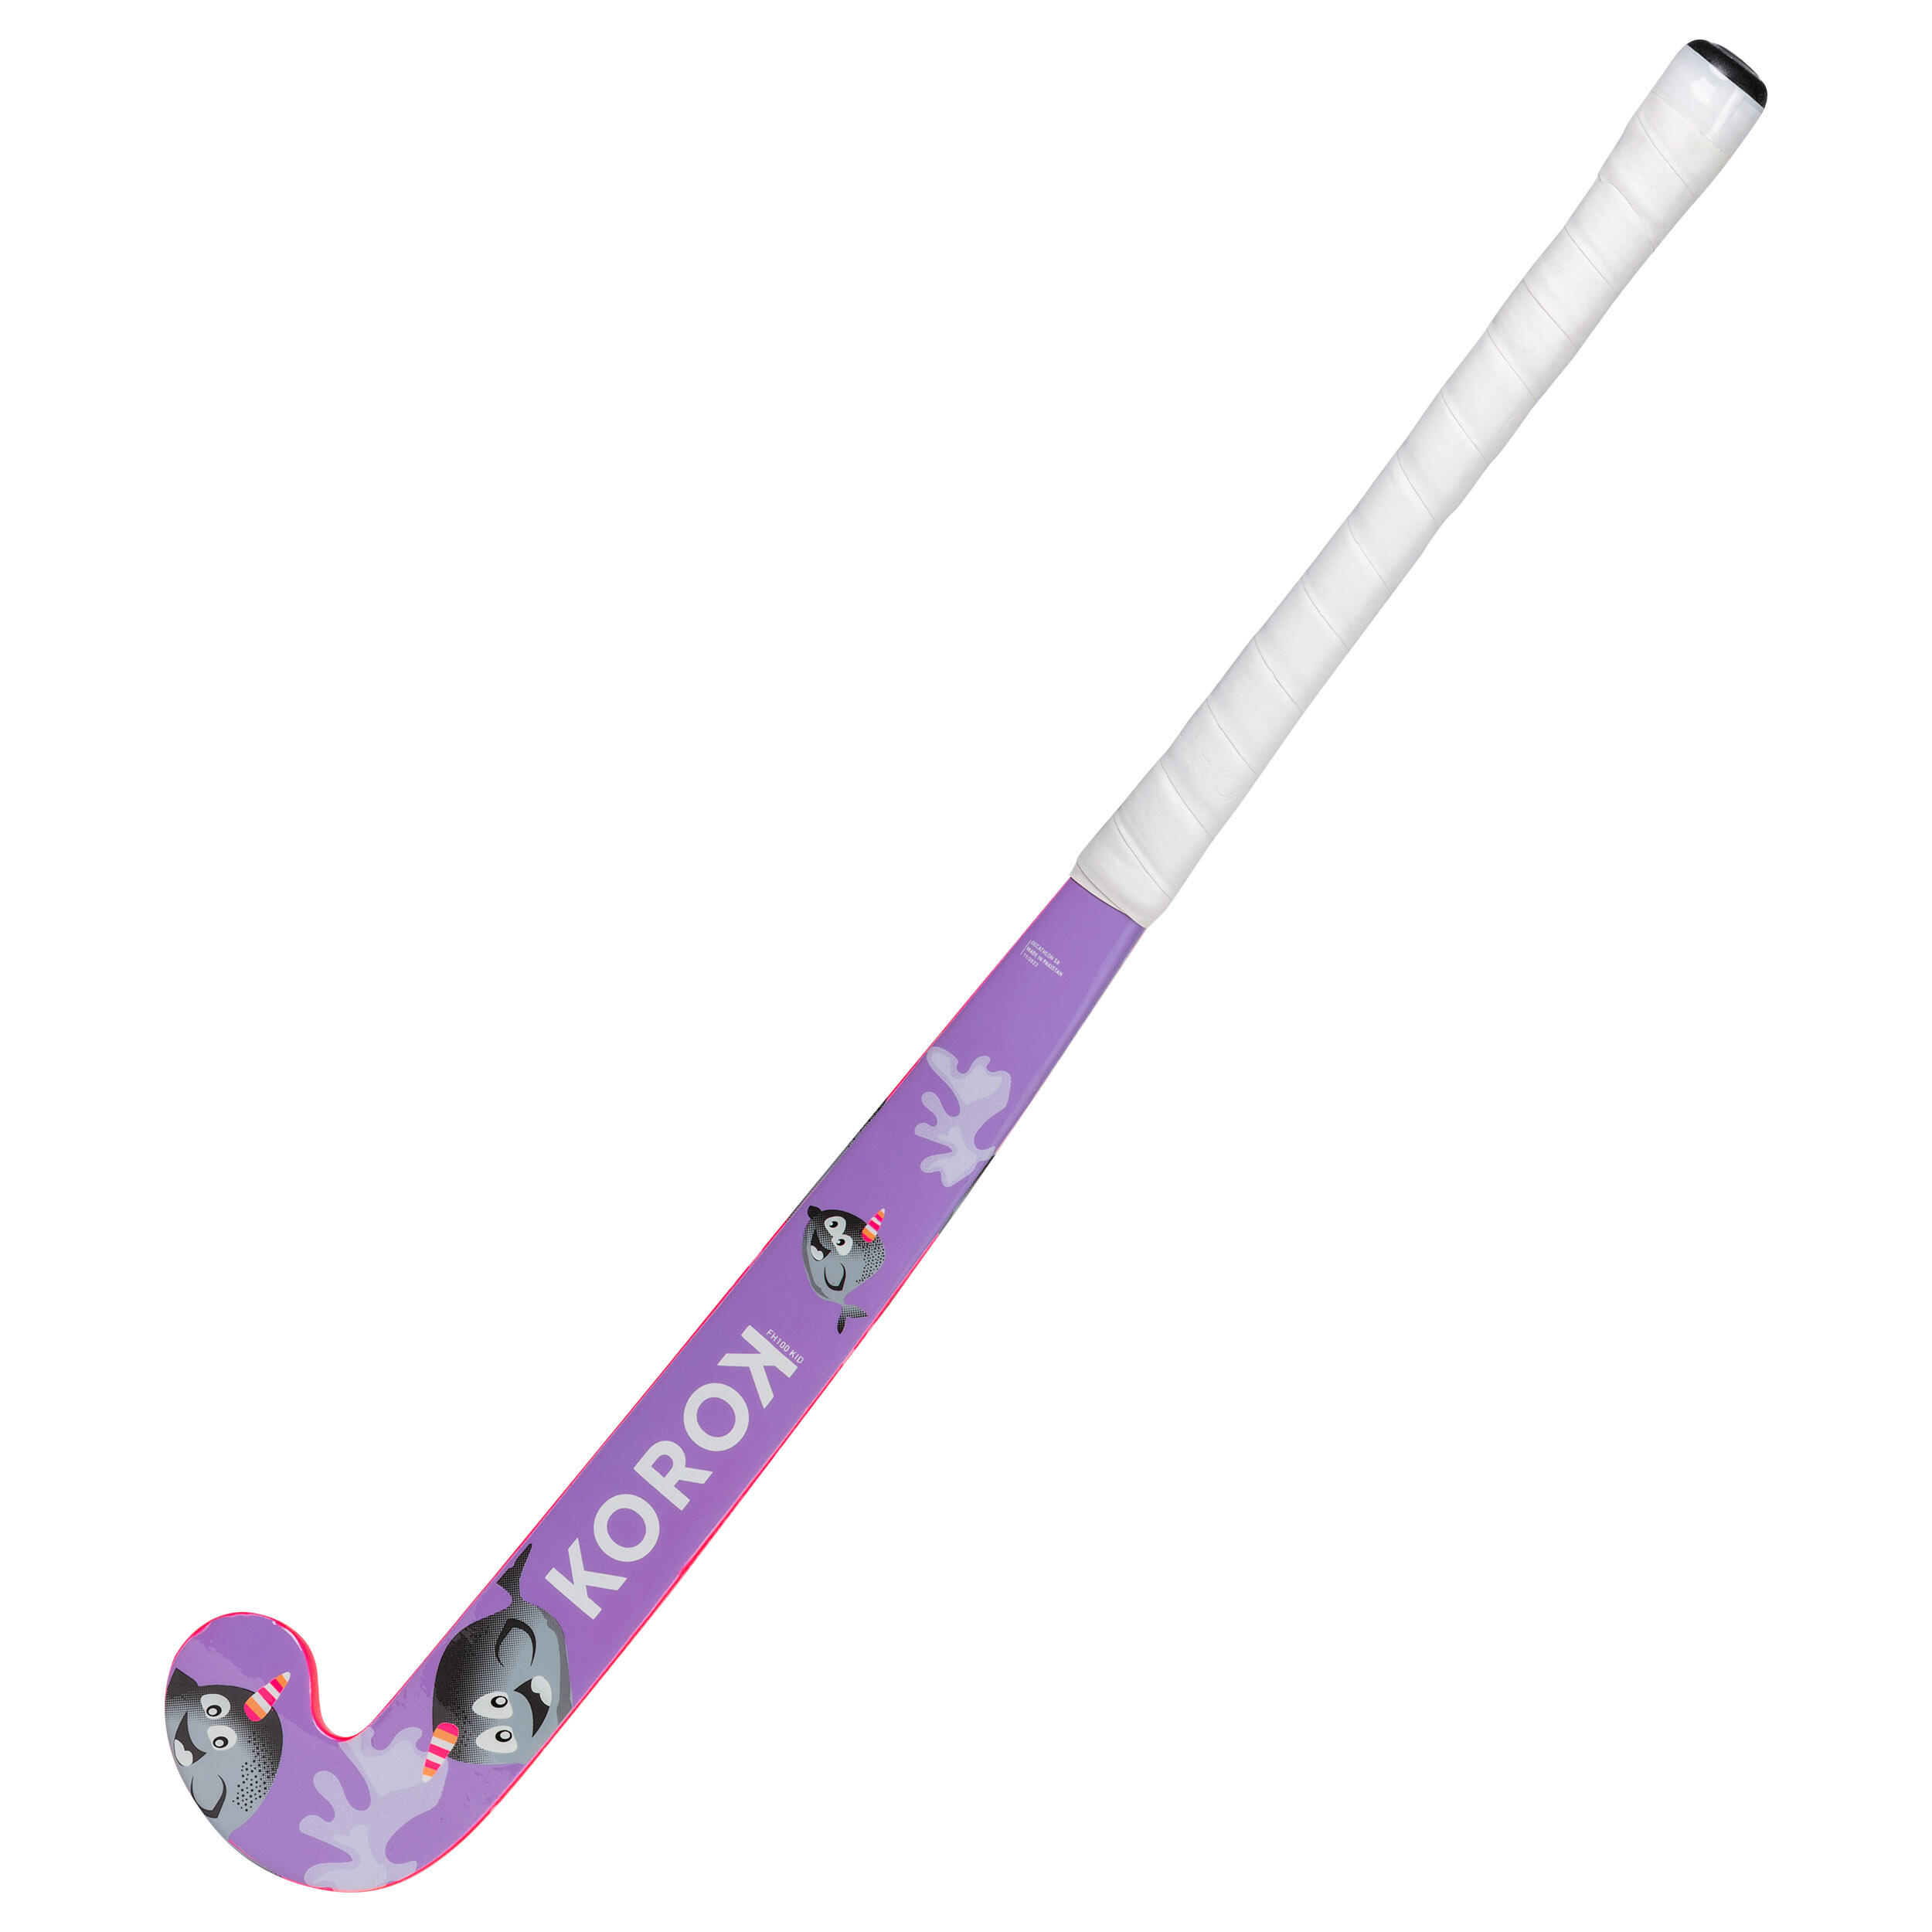 Kids' Wood Field Hockey Stick FH100 - Narwhal 4/11